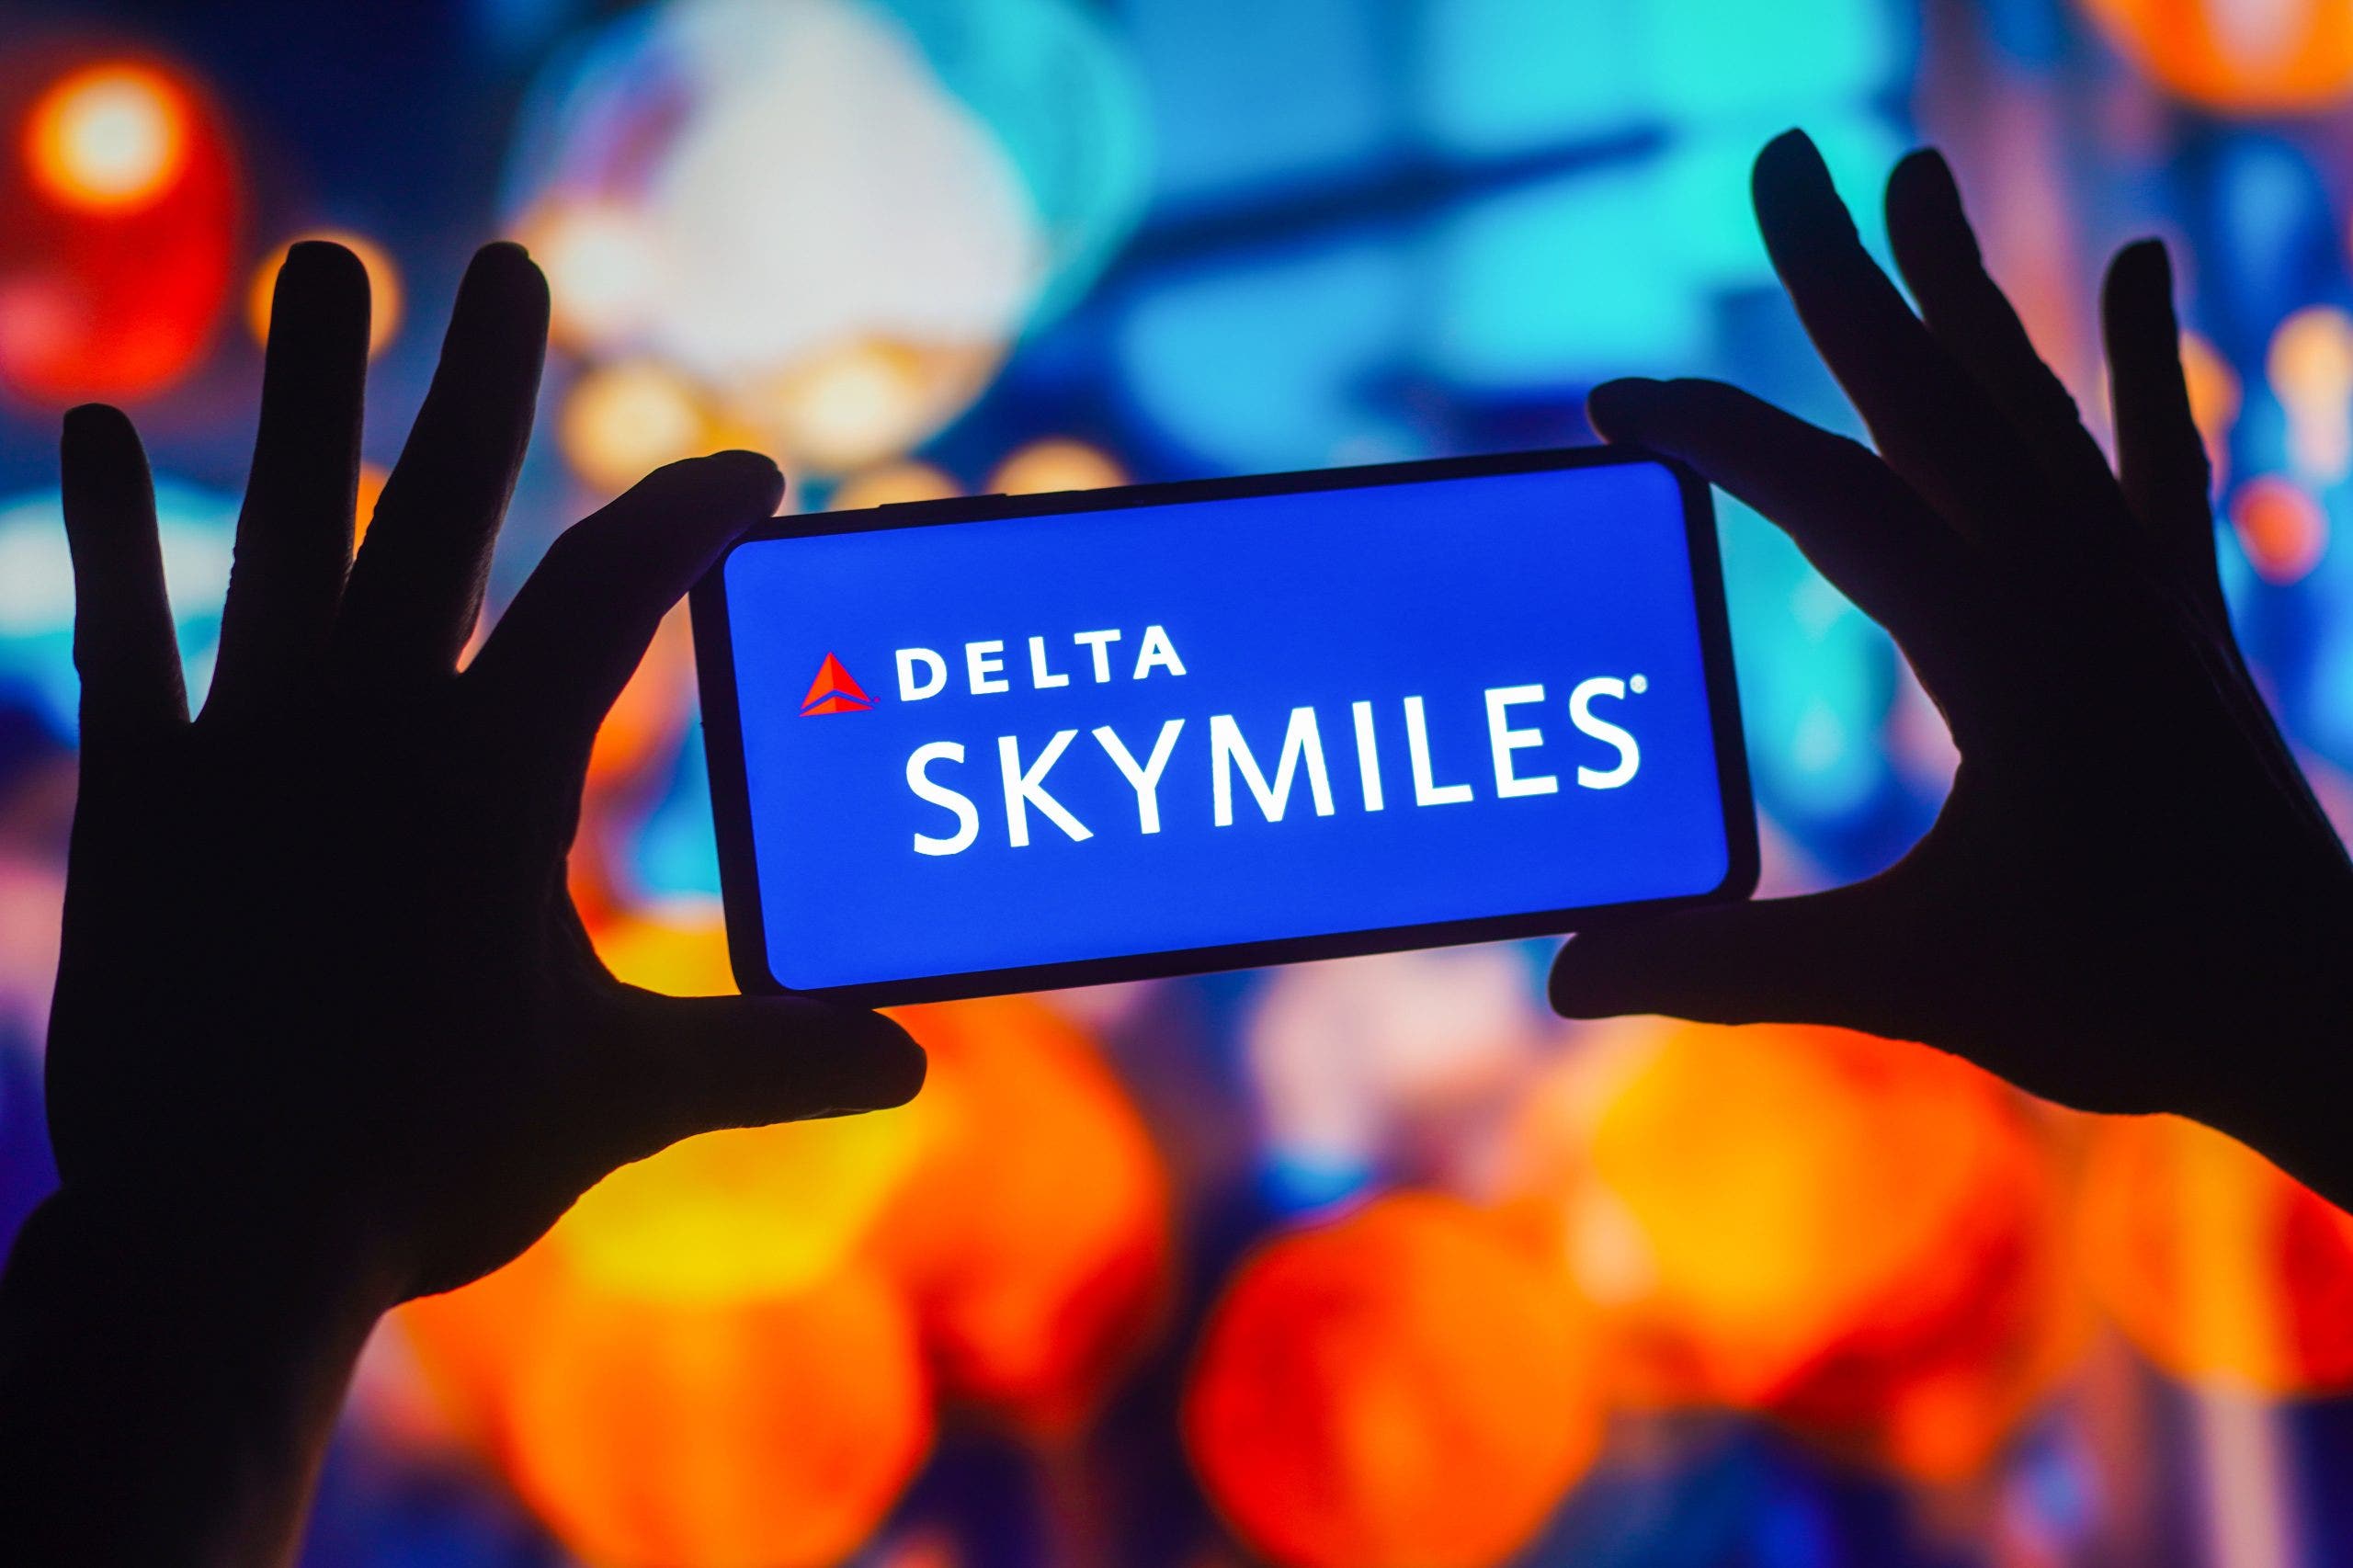 Delta SkyMiles Loyalty Program: How Fliers Can Maximize their Miles [Video]